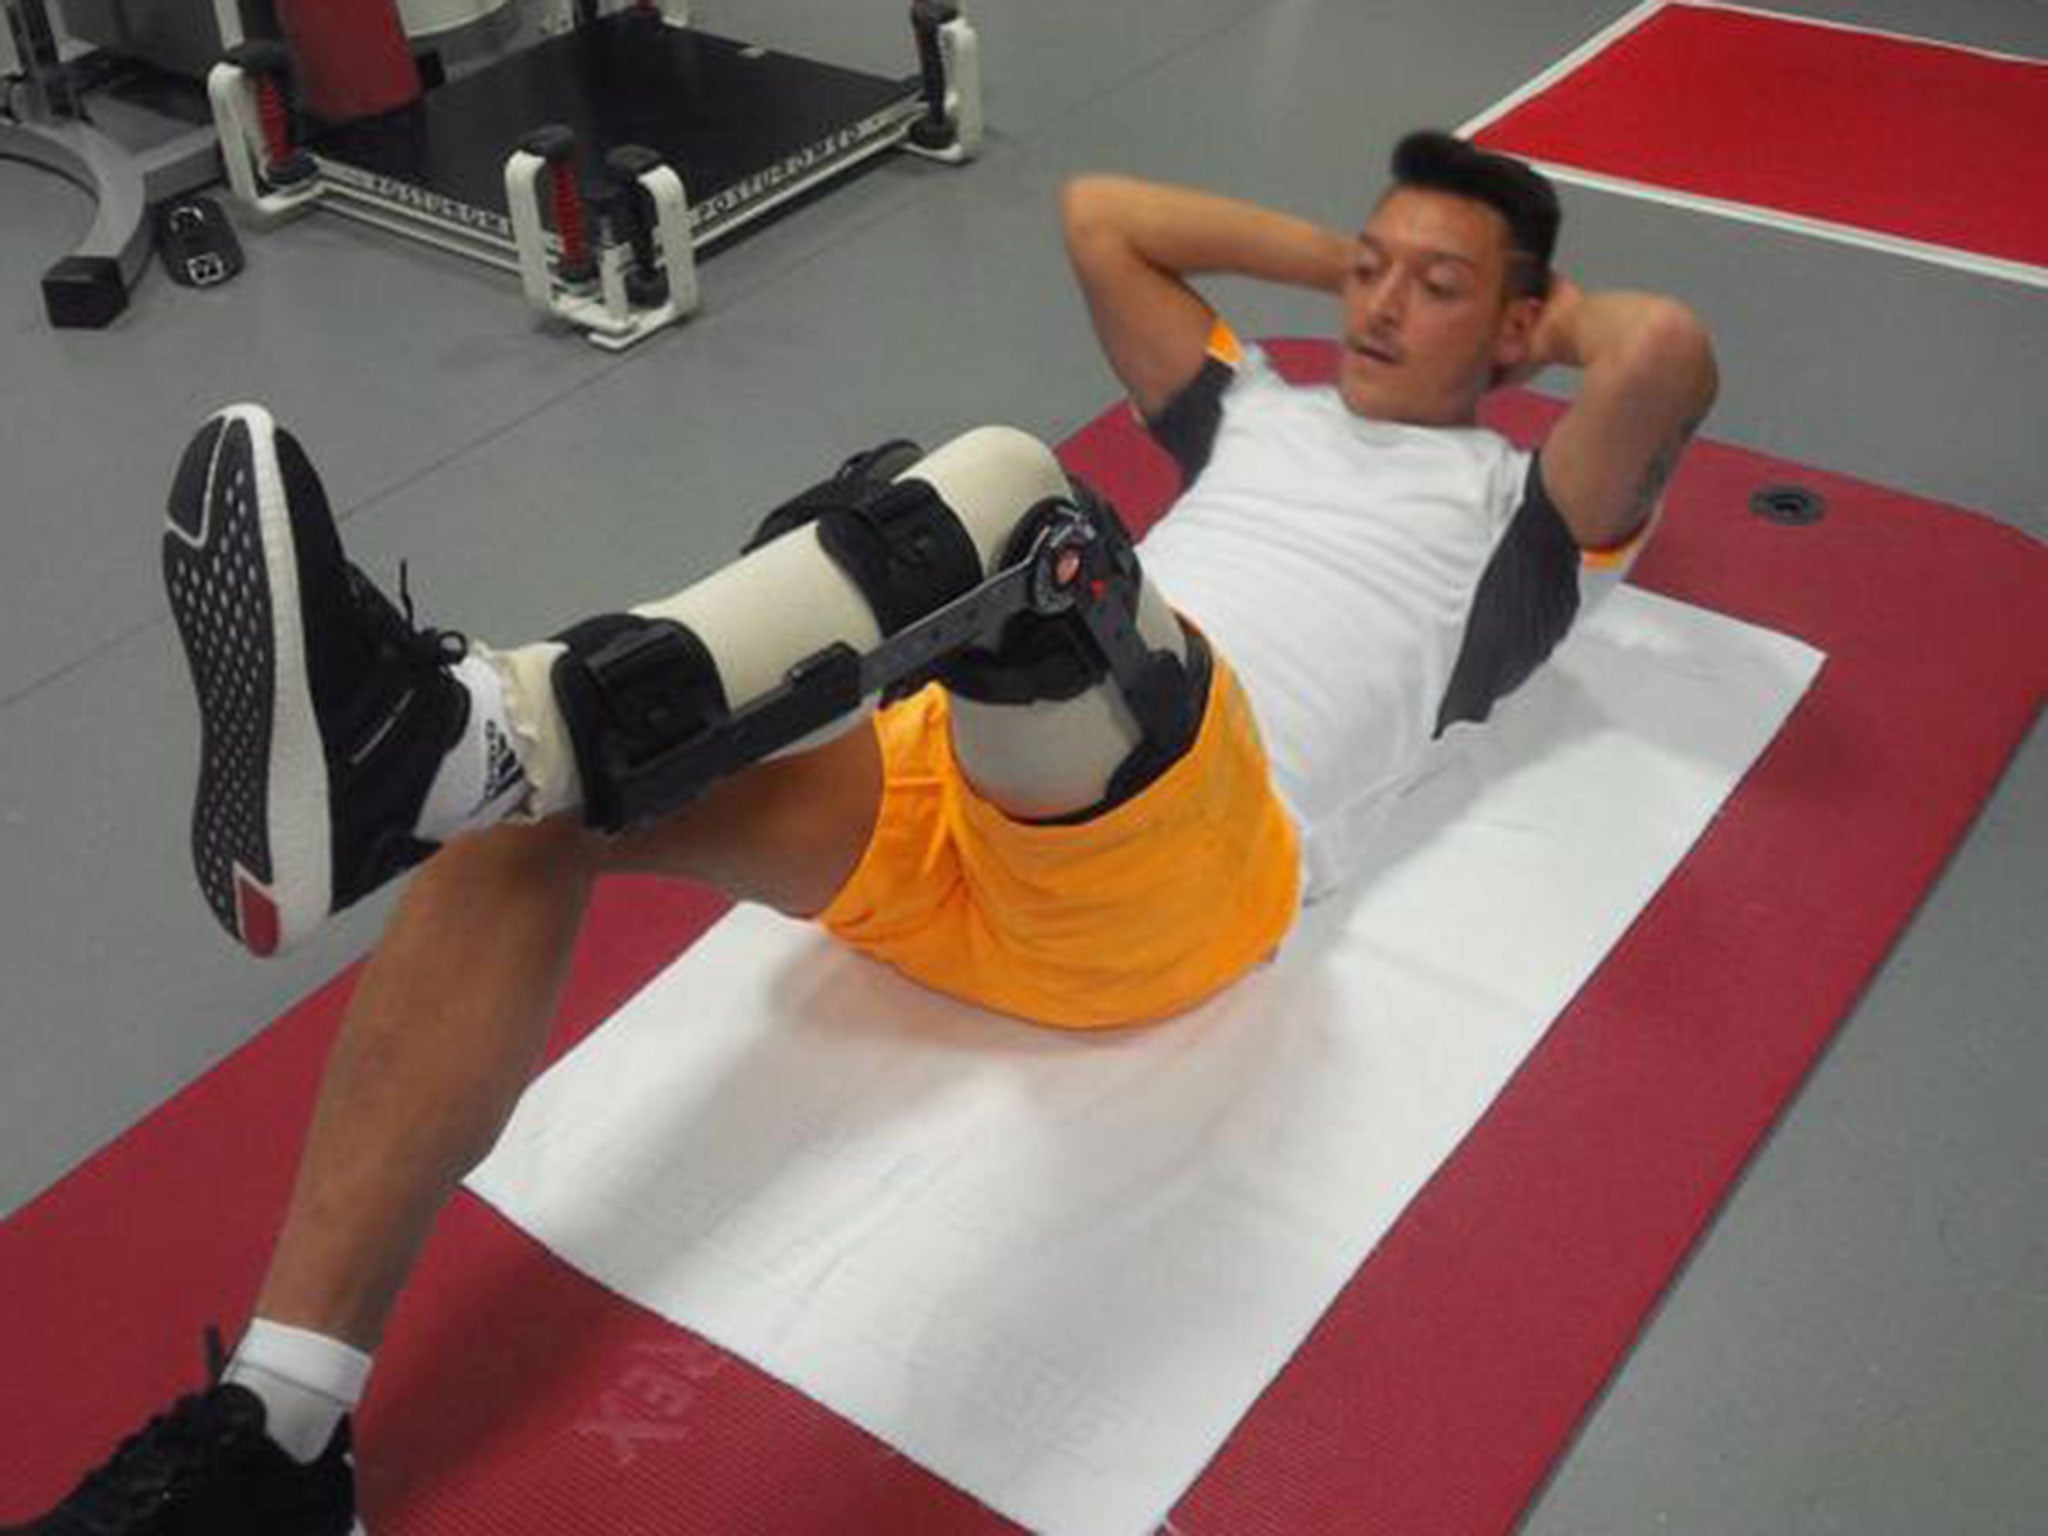 Mesut Özil posted this picture on his Twitter account to update fans on his injury status